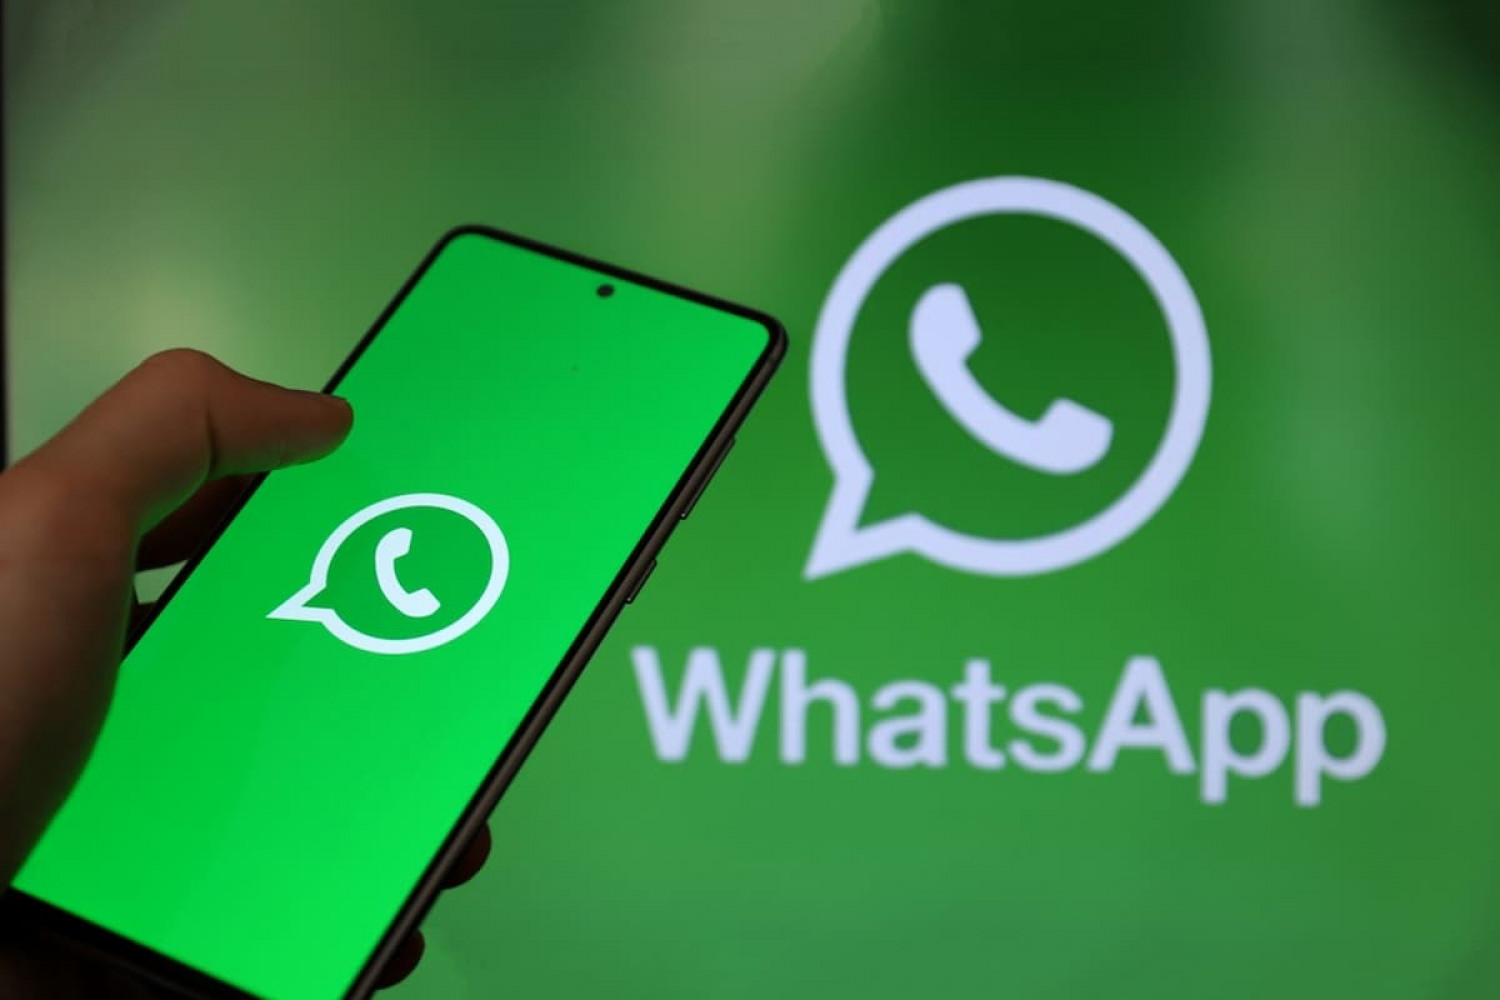 Use WhatsApp offline with this simple trick